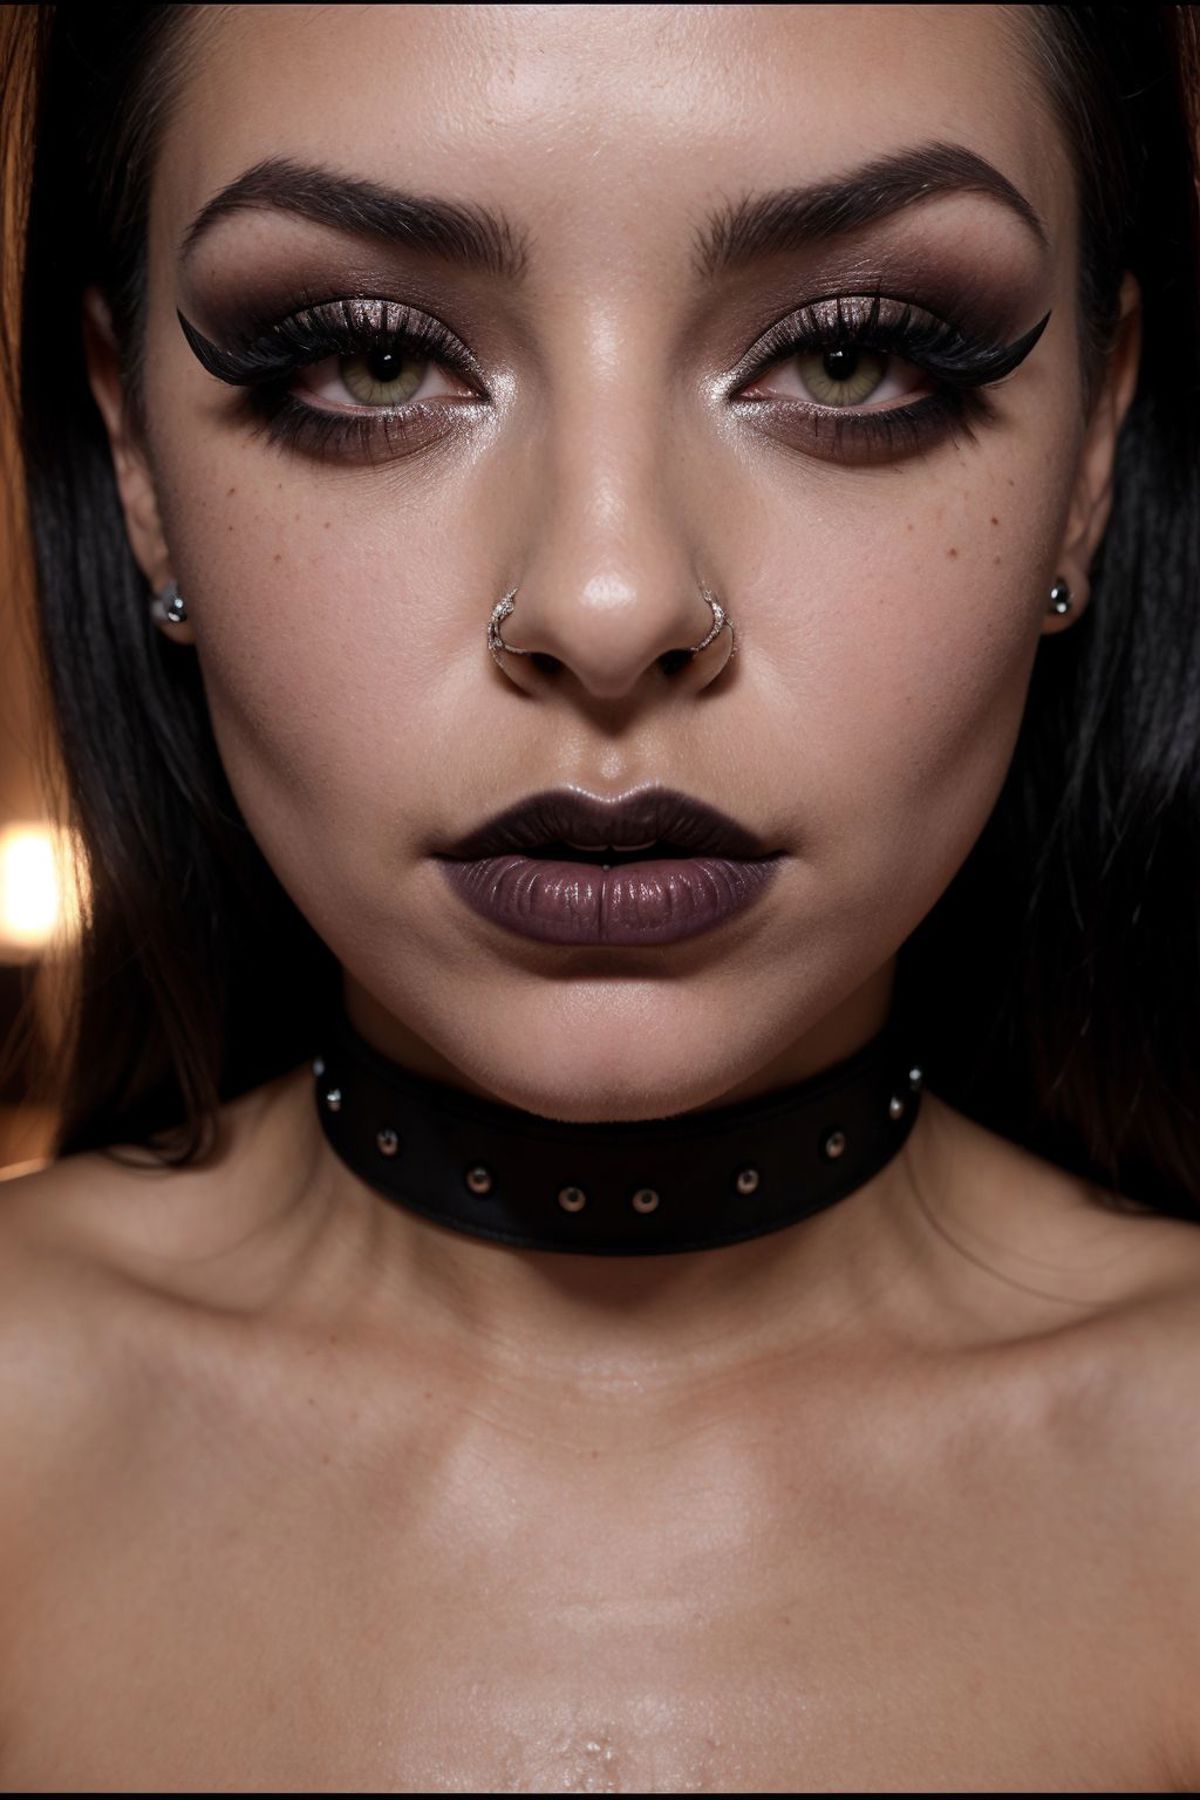 A woman with dark makeup, including purple lipstick, is wearing a black leather choker necklace.